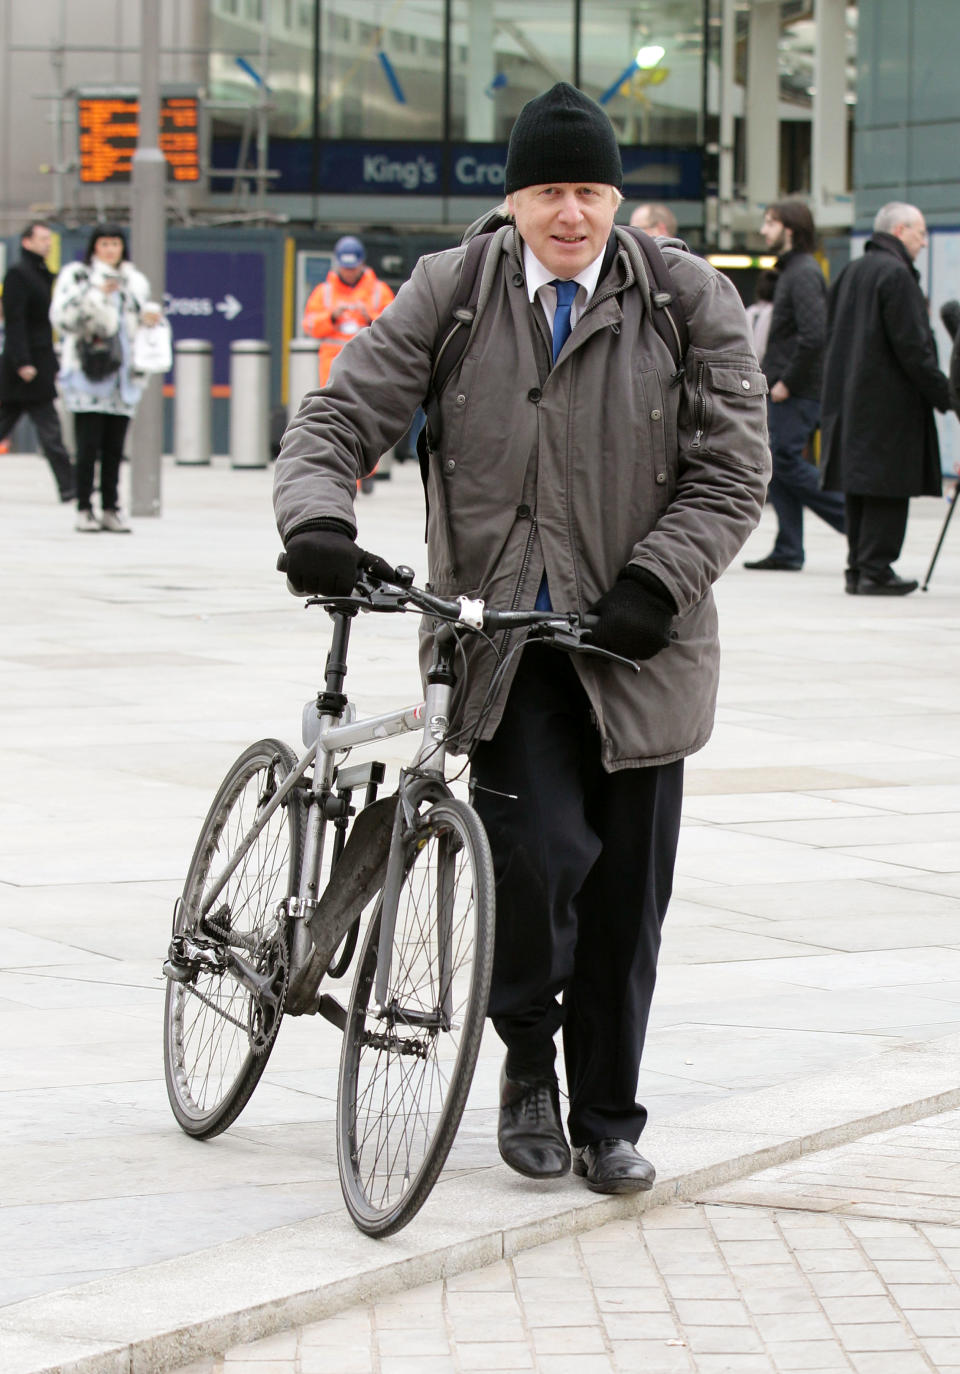 Boris Johnson leaving King's Cross station on his bike after attending the Get Ahead of the Games � Plan Your Travel in 2012 Event, an initiative to explain to commuters and the travelling public across London and the UK how transport networks will operate during Games-time and how they should plan their travel. 